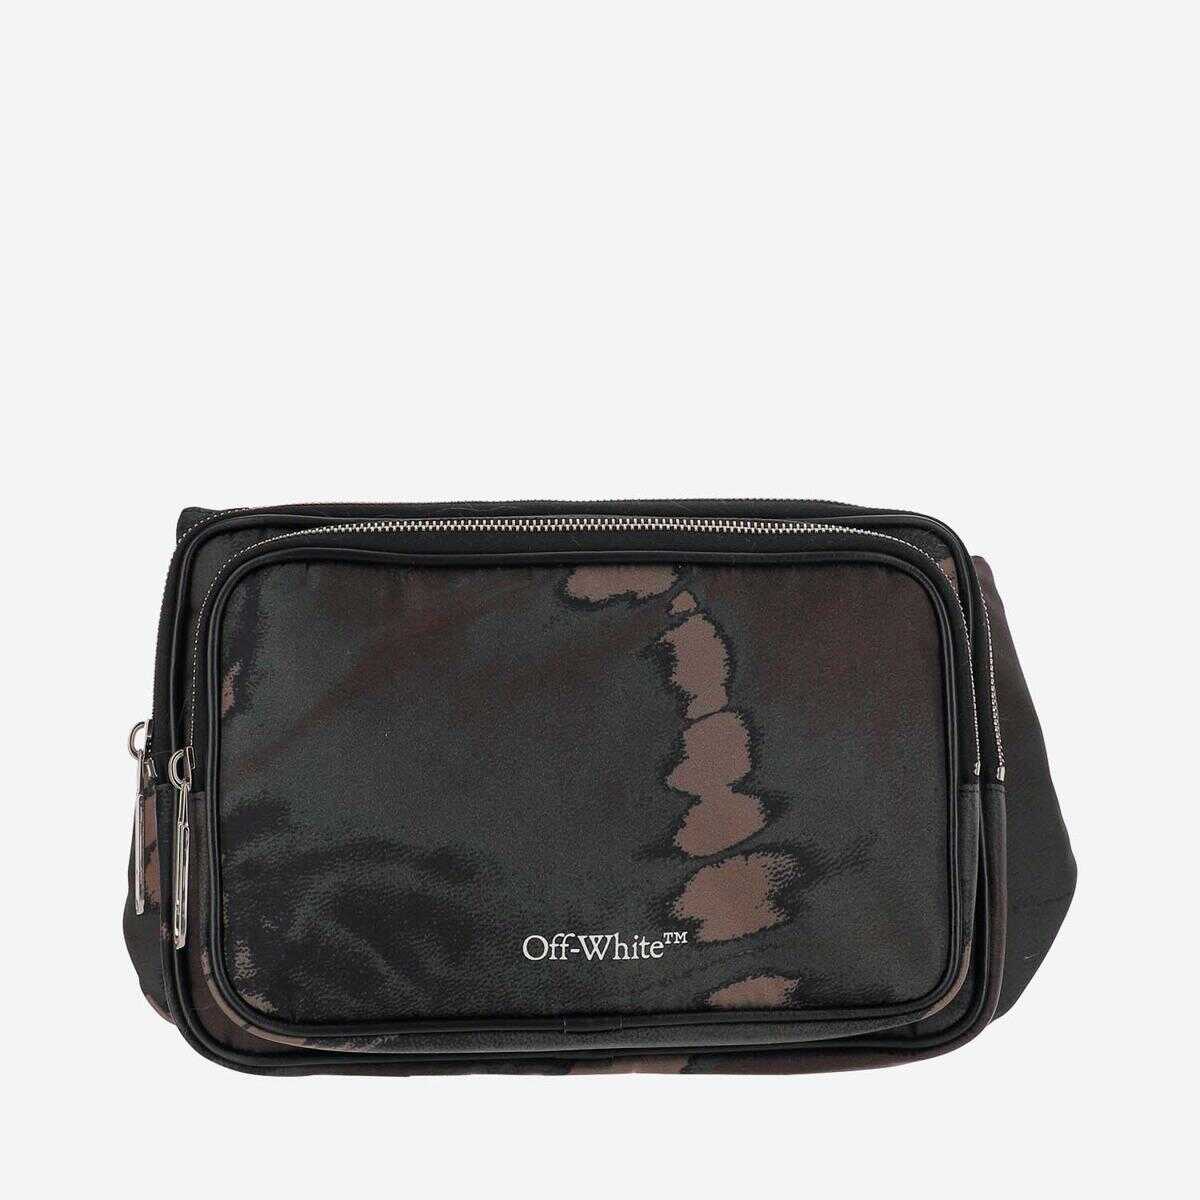 Off-White OFF-WHITE ARROW TUC WAIST BAG WITH TIE-DYE CAMO PATTERN ROSSO